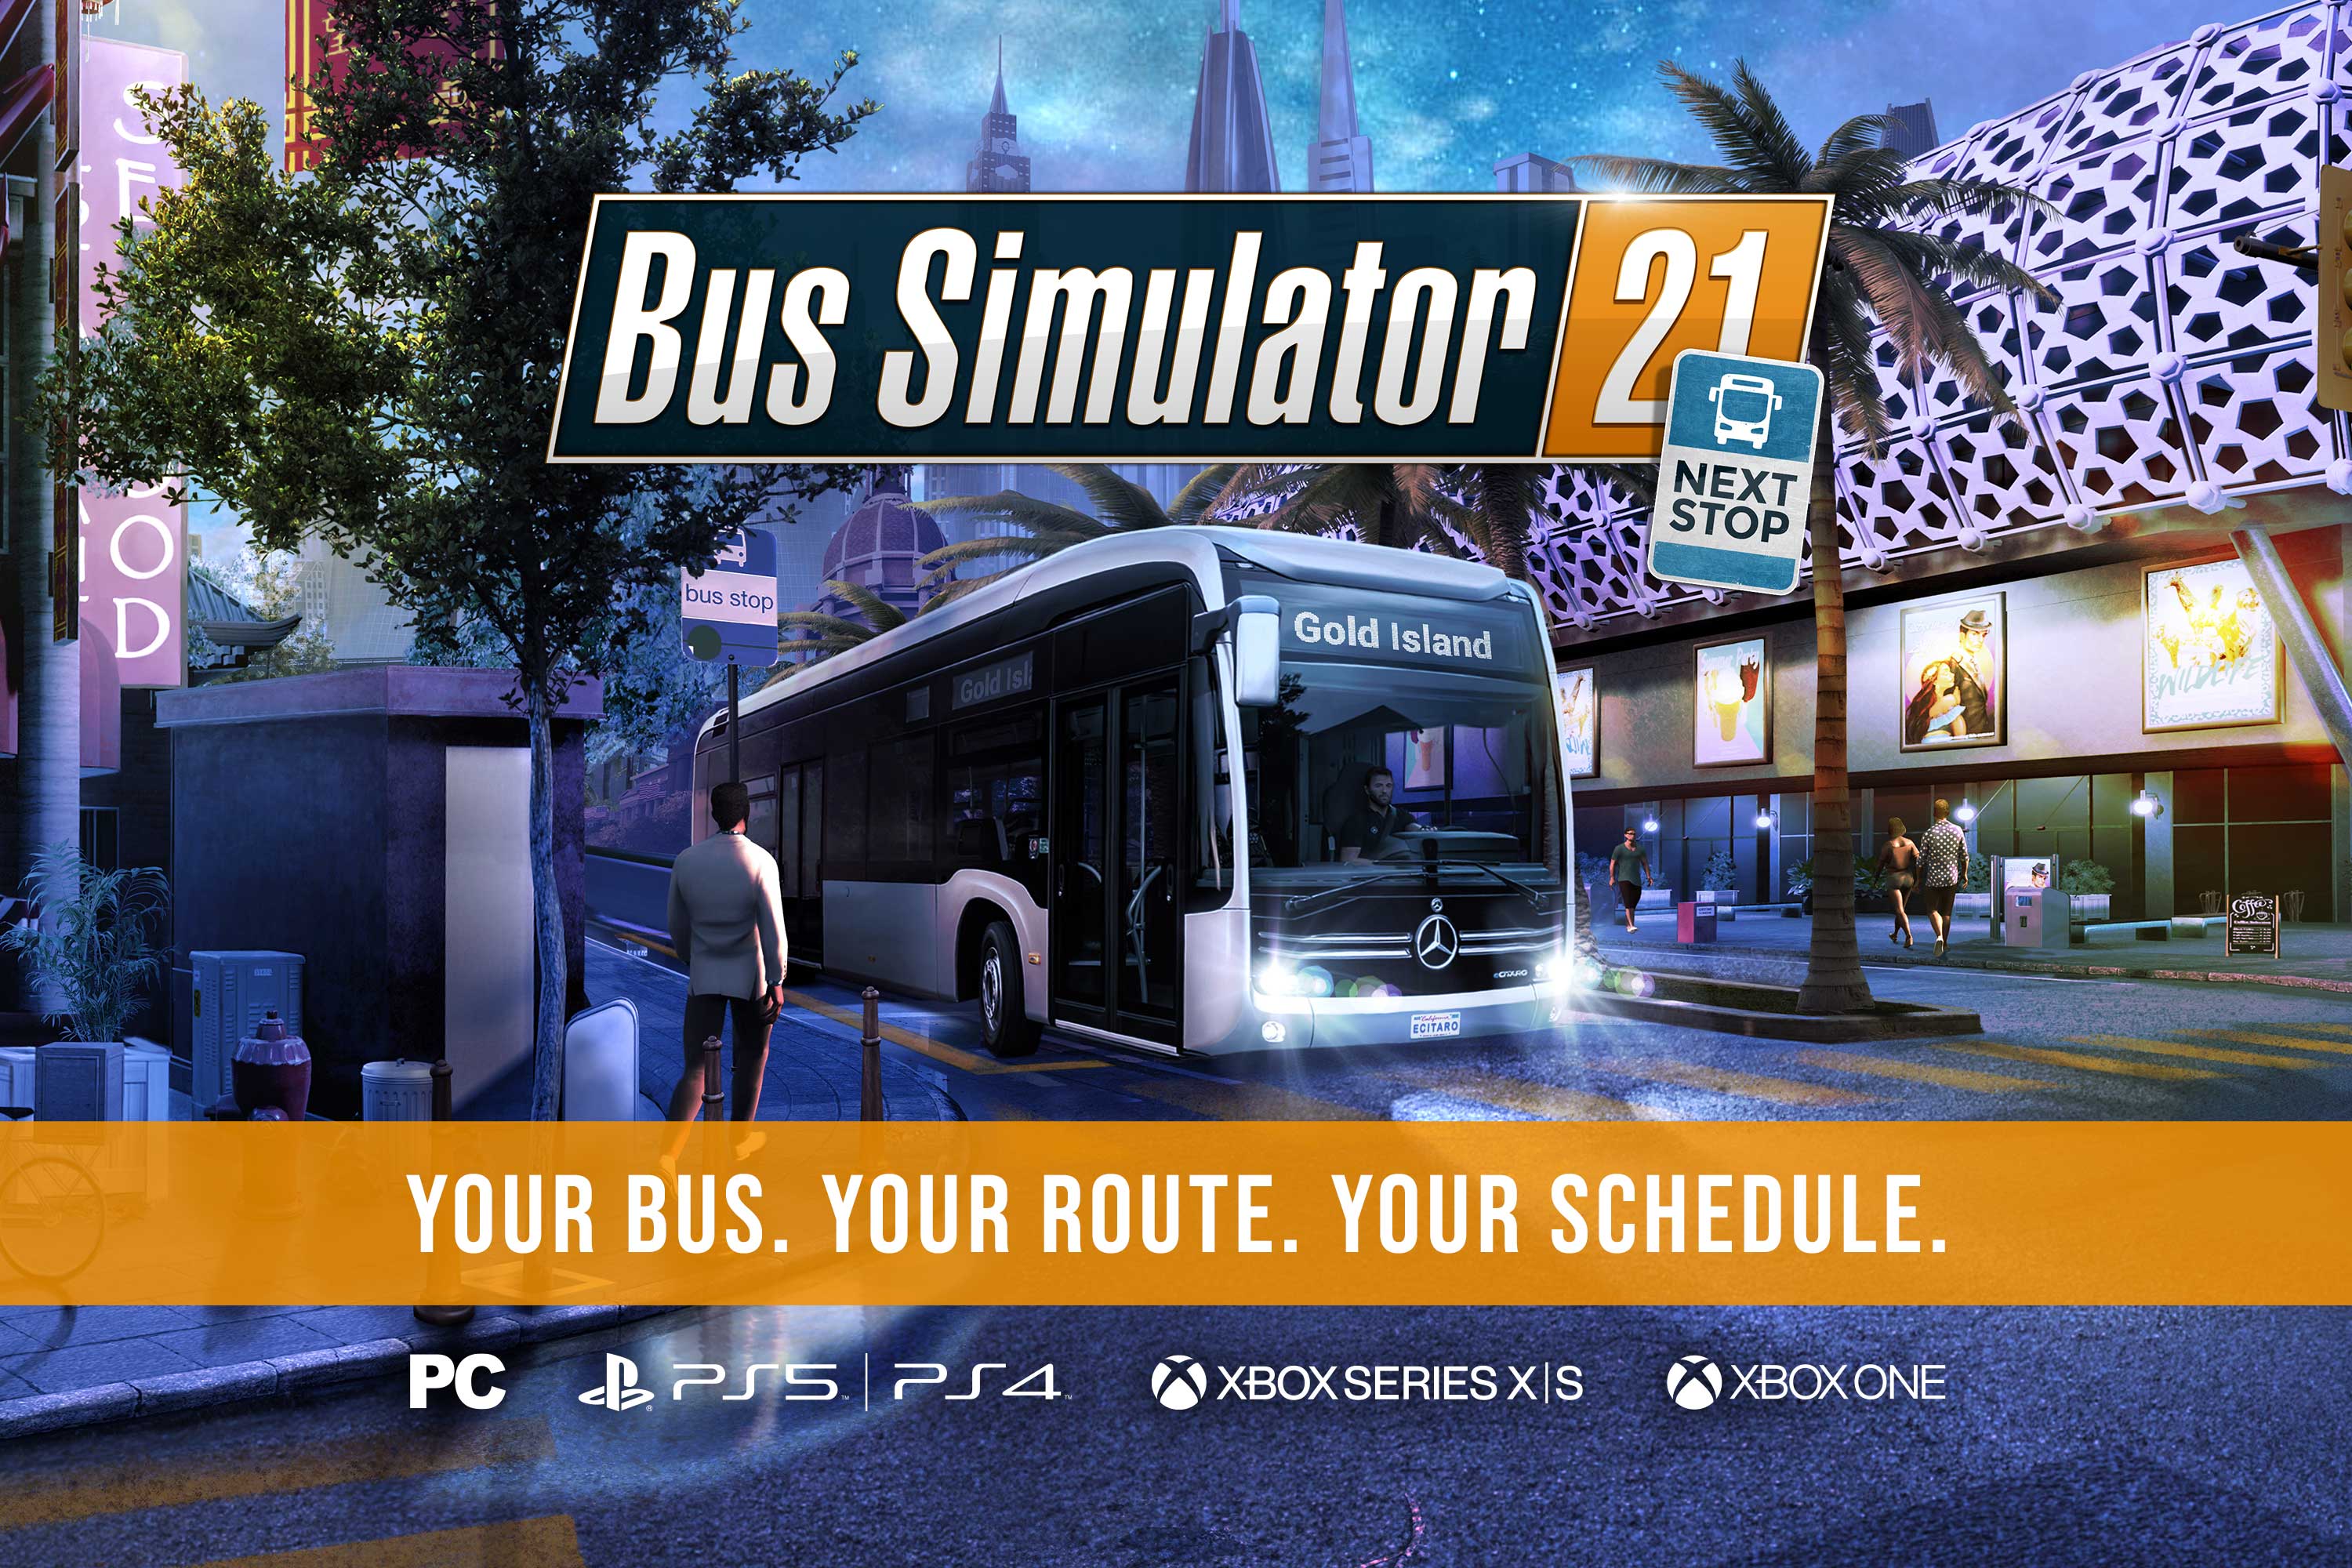 Proton Bus Simulator Road APK + Mod 157.0 - Download Free for Android